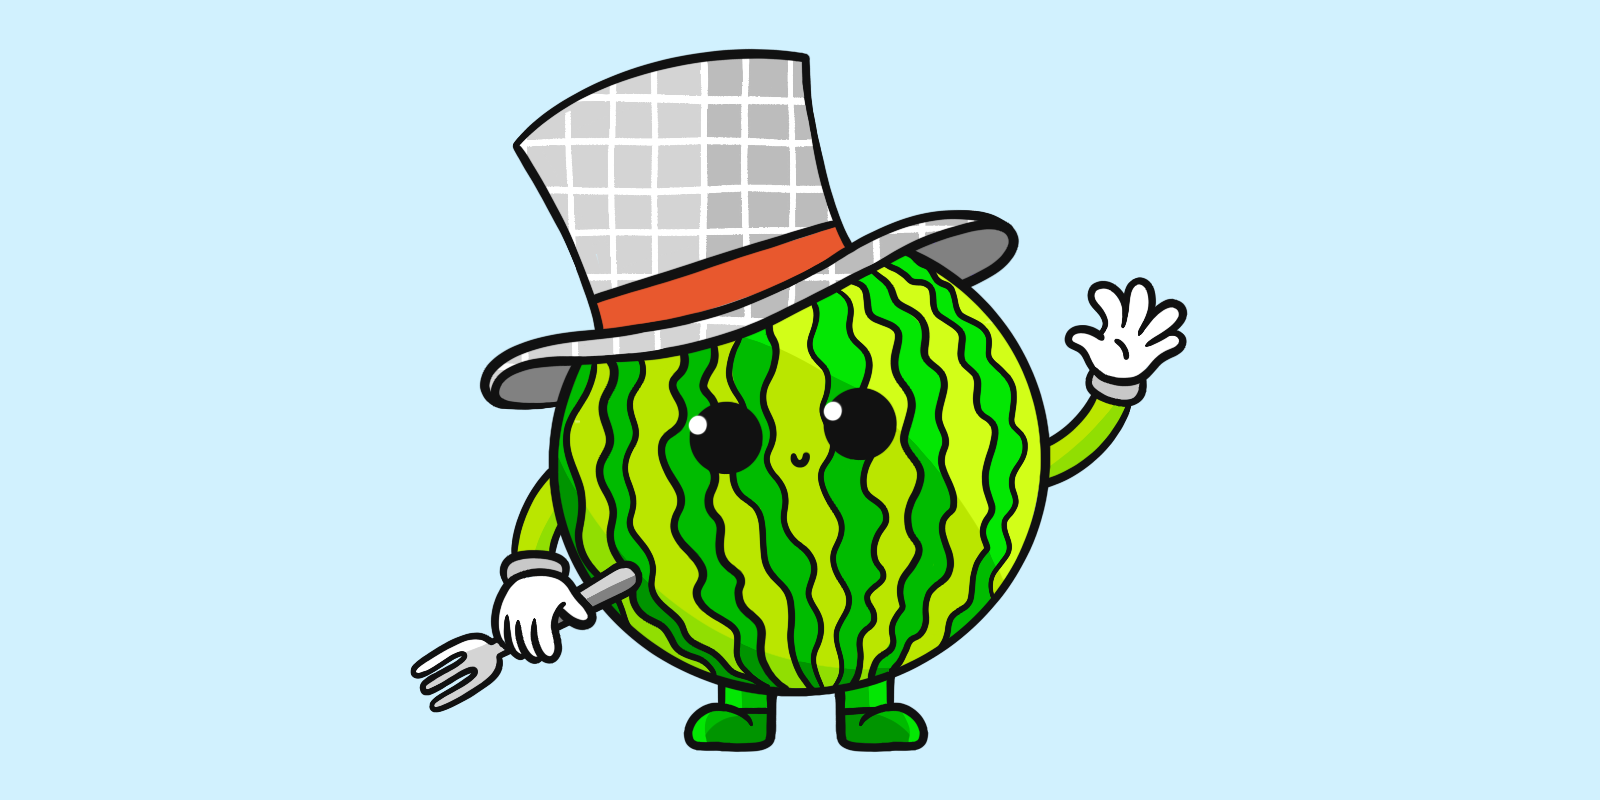 An illustrated magic watermelon in a top hat over a sky blue background